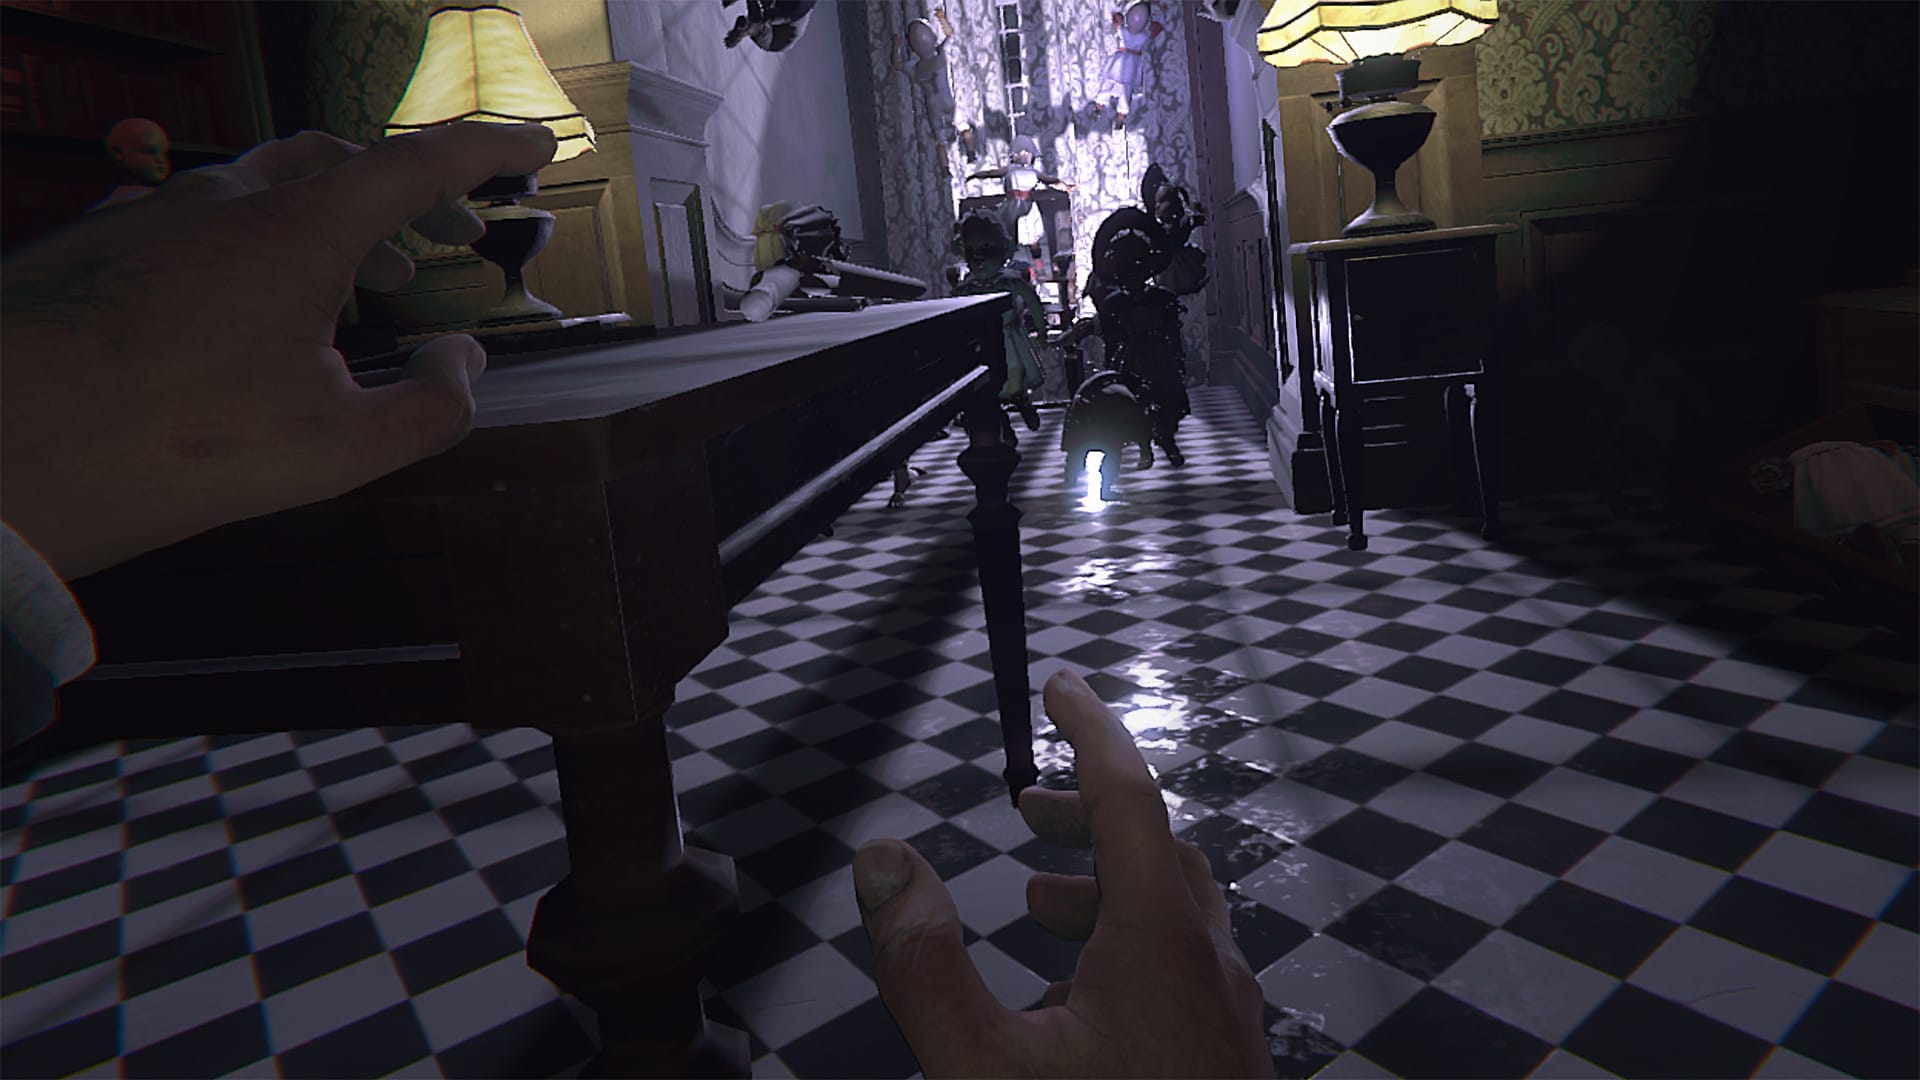 Layers of Fear VR Review – The Sussex Newspaper